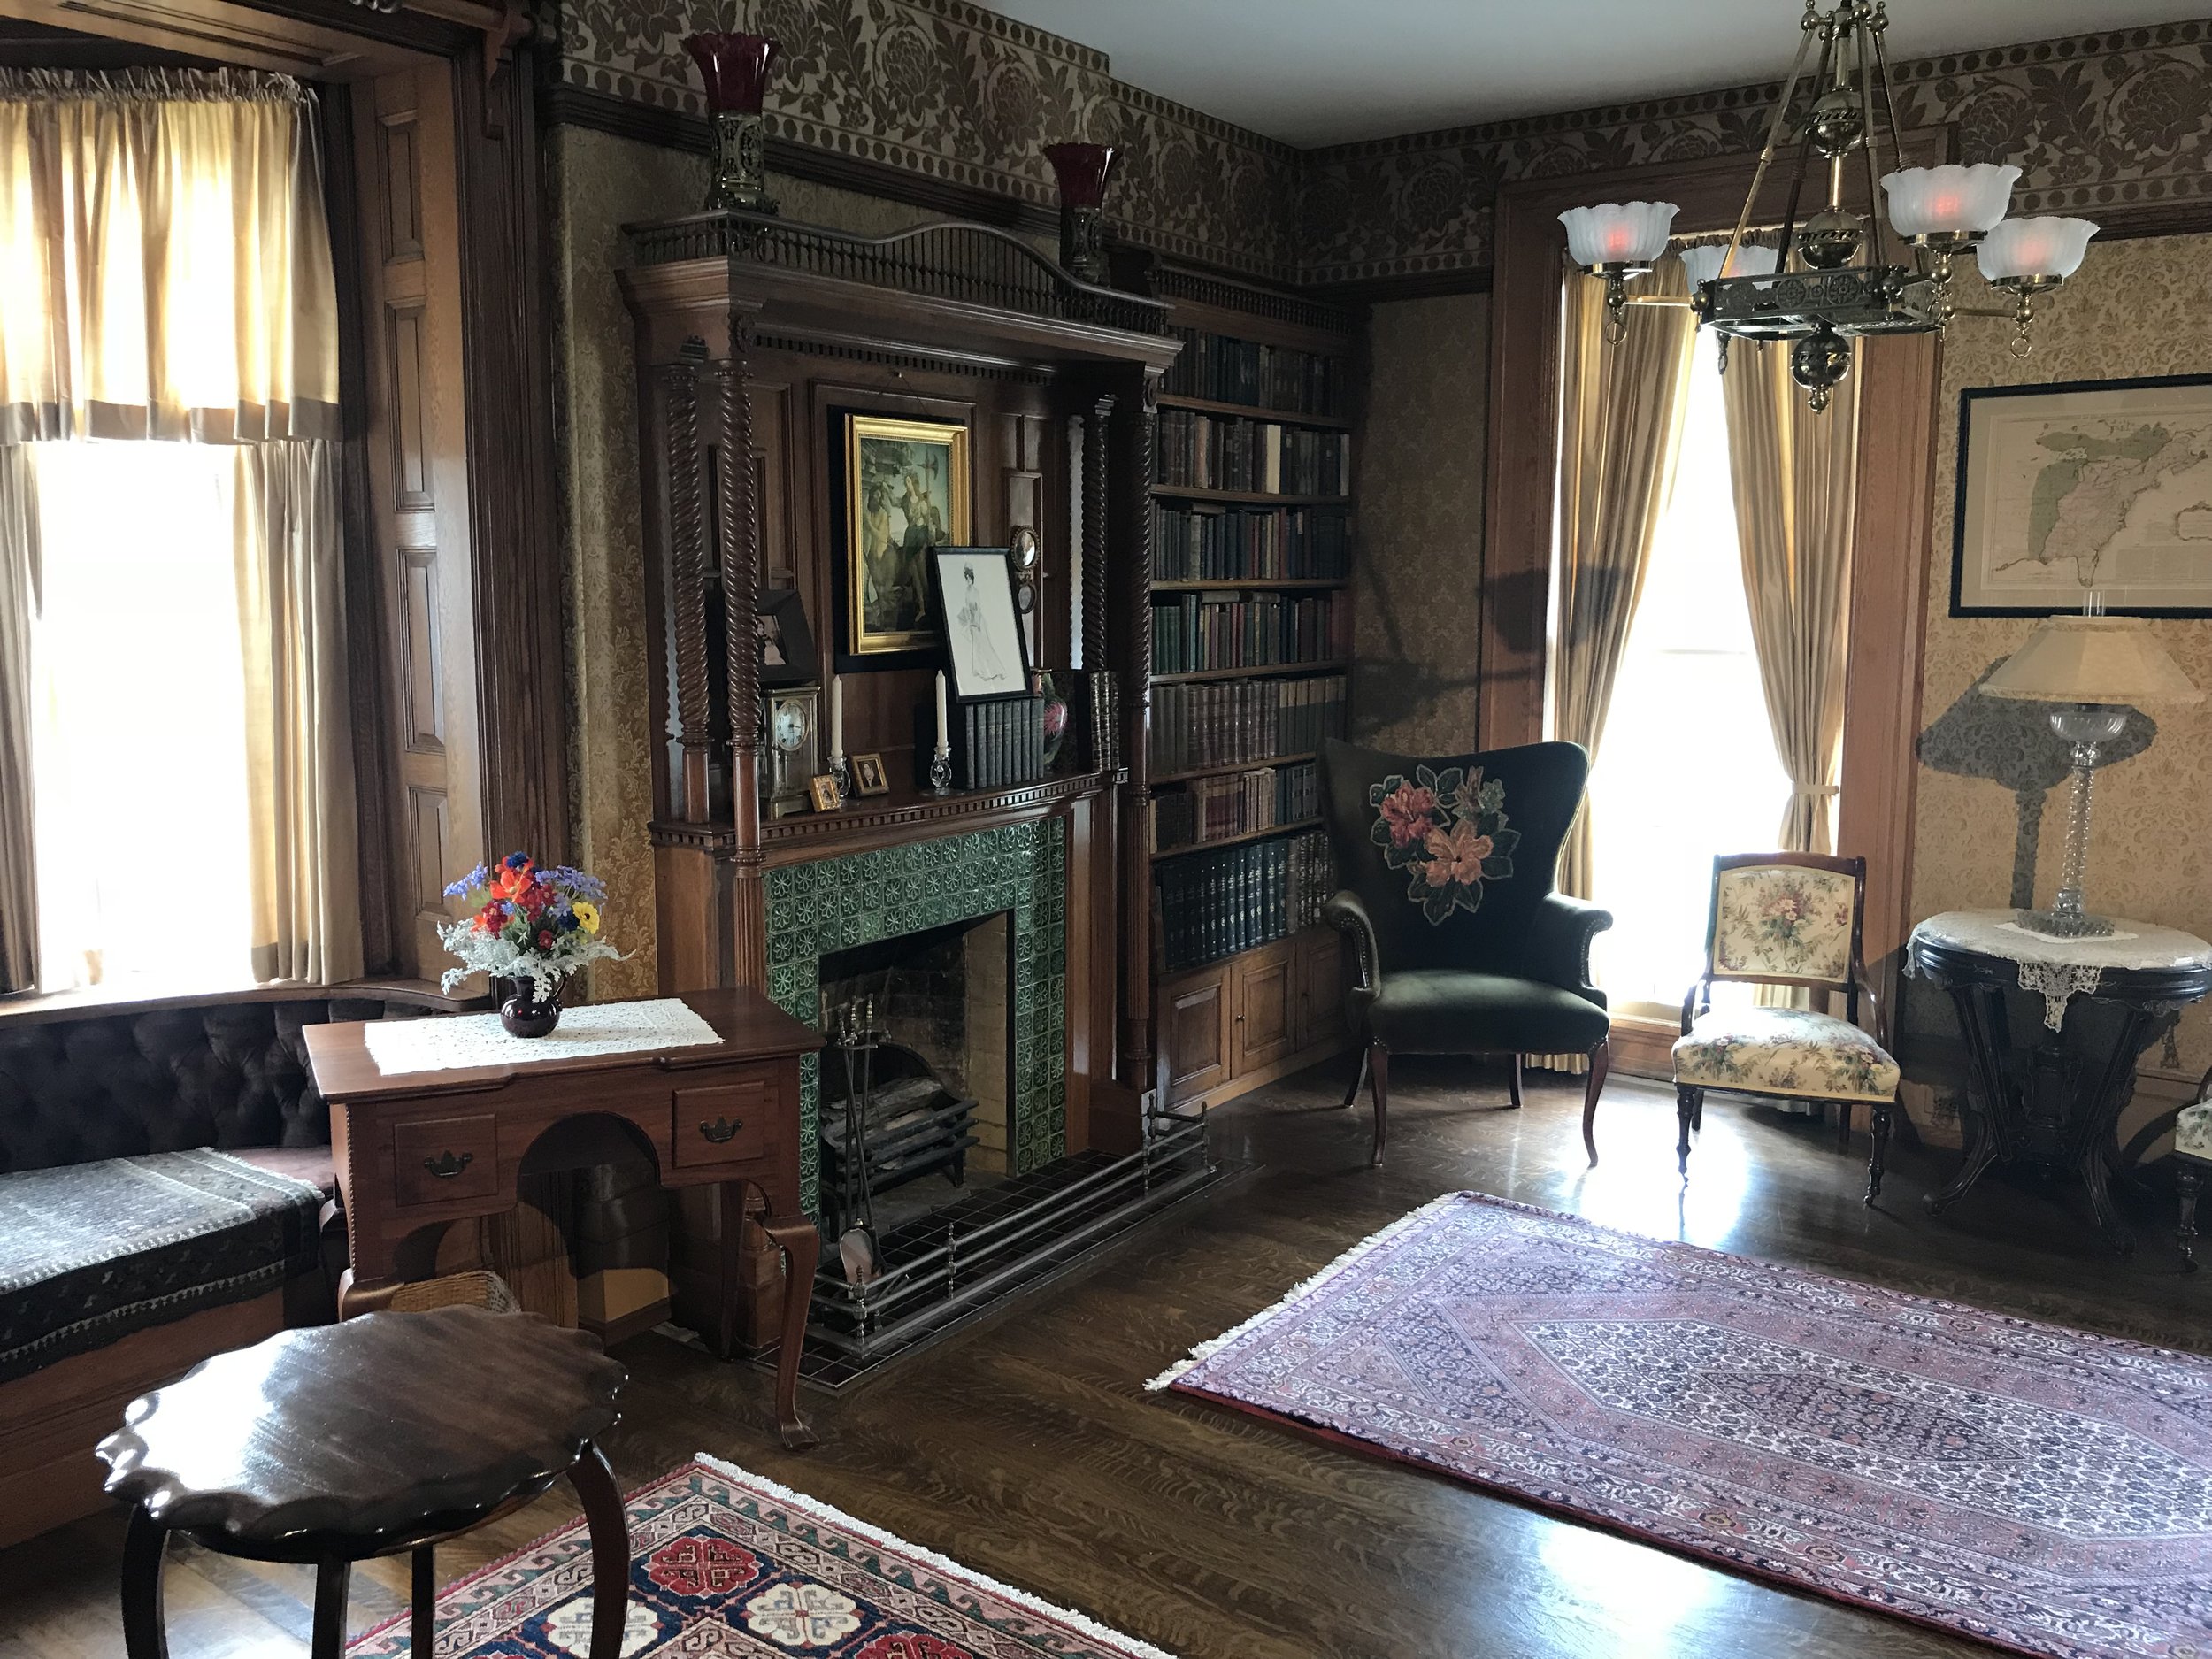  The parlor in which Roosevelt was sworn in. 